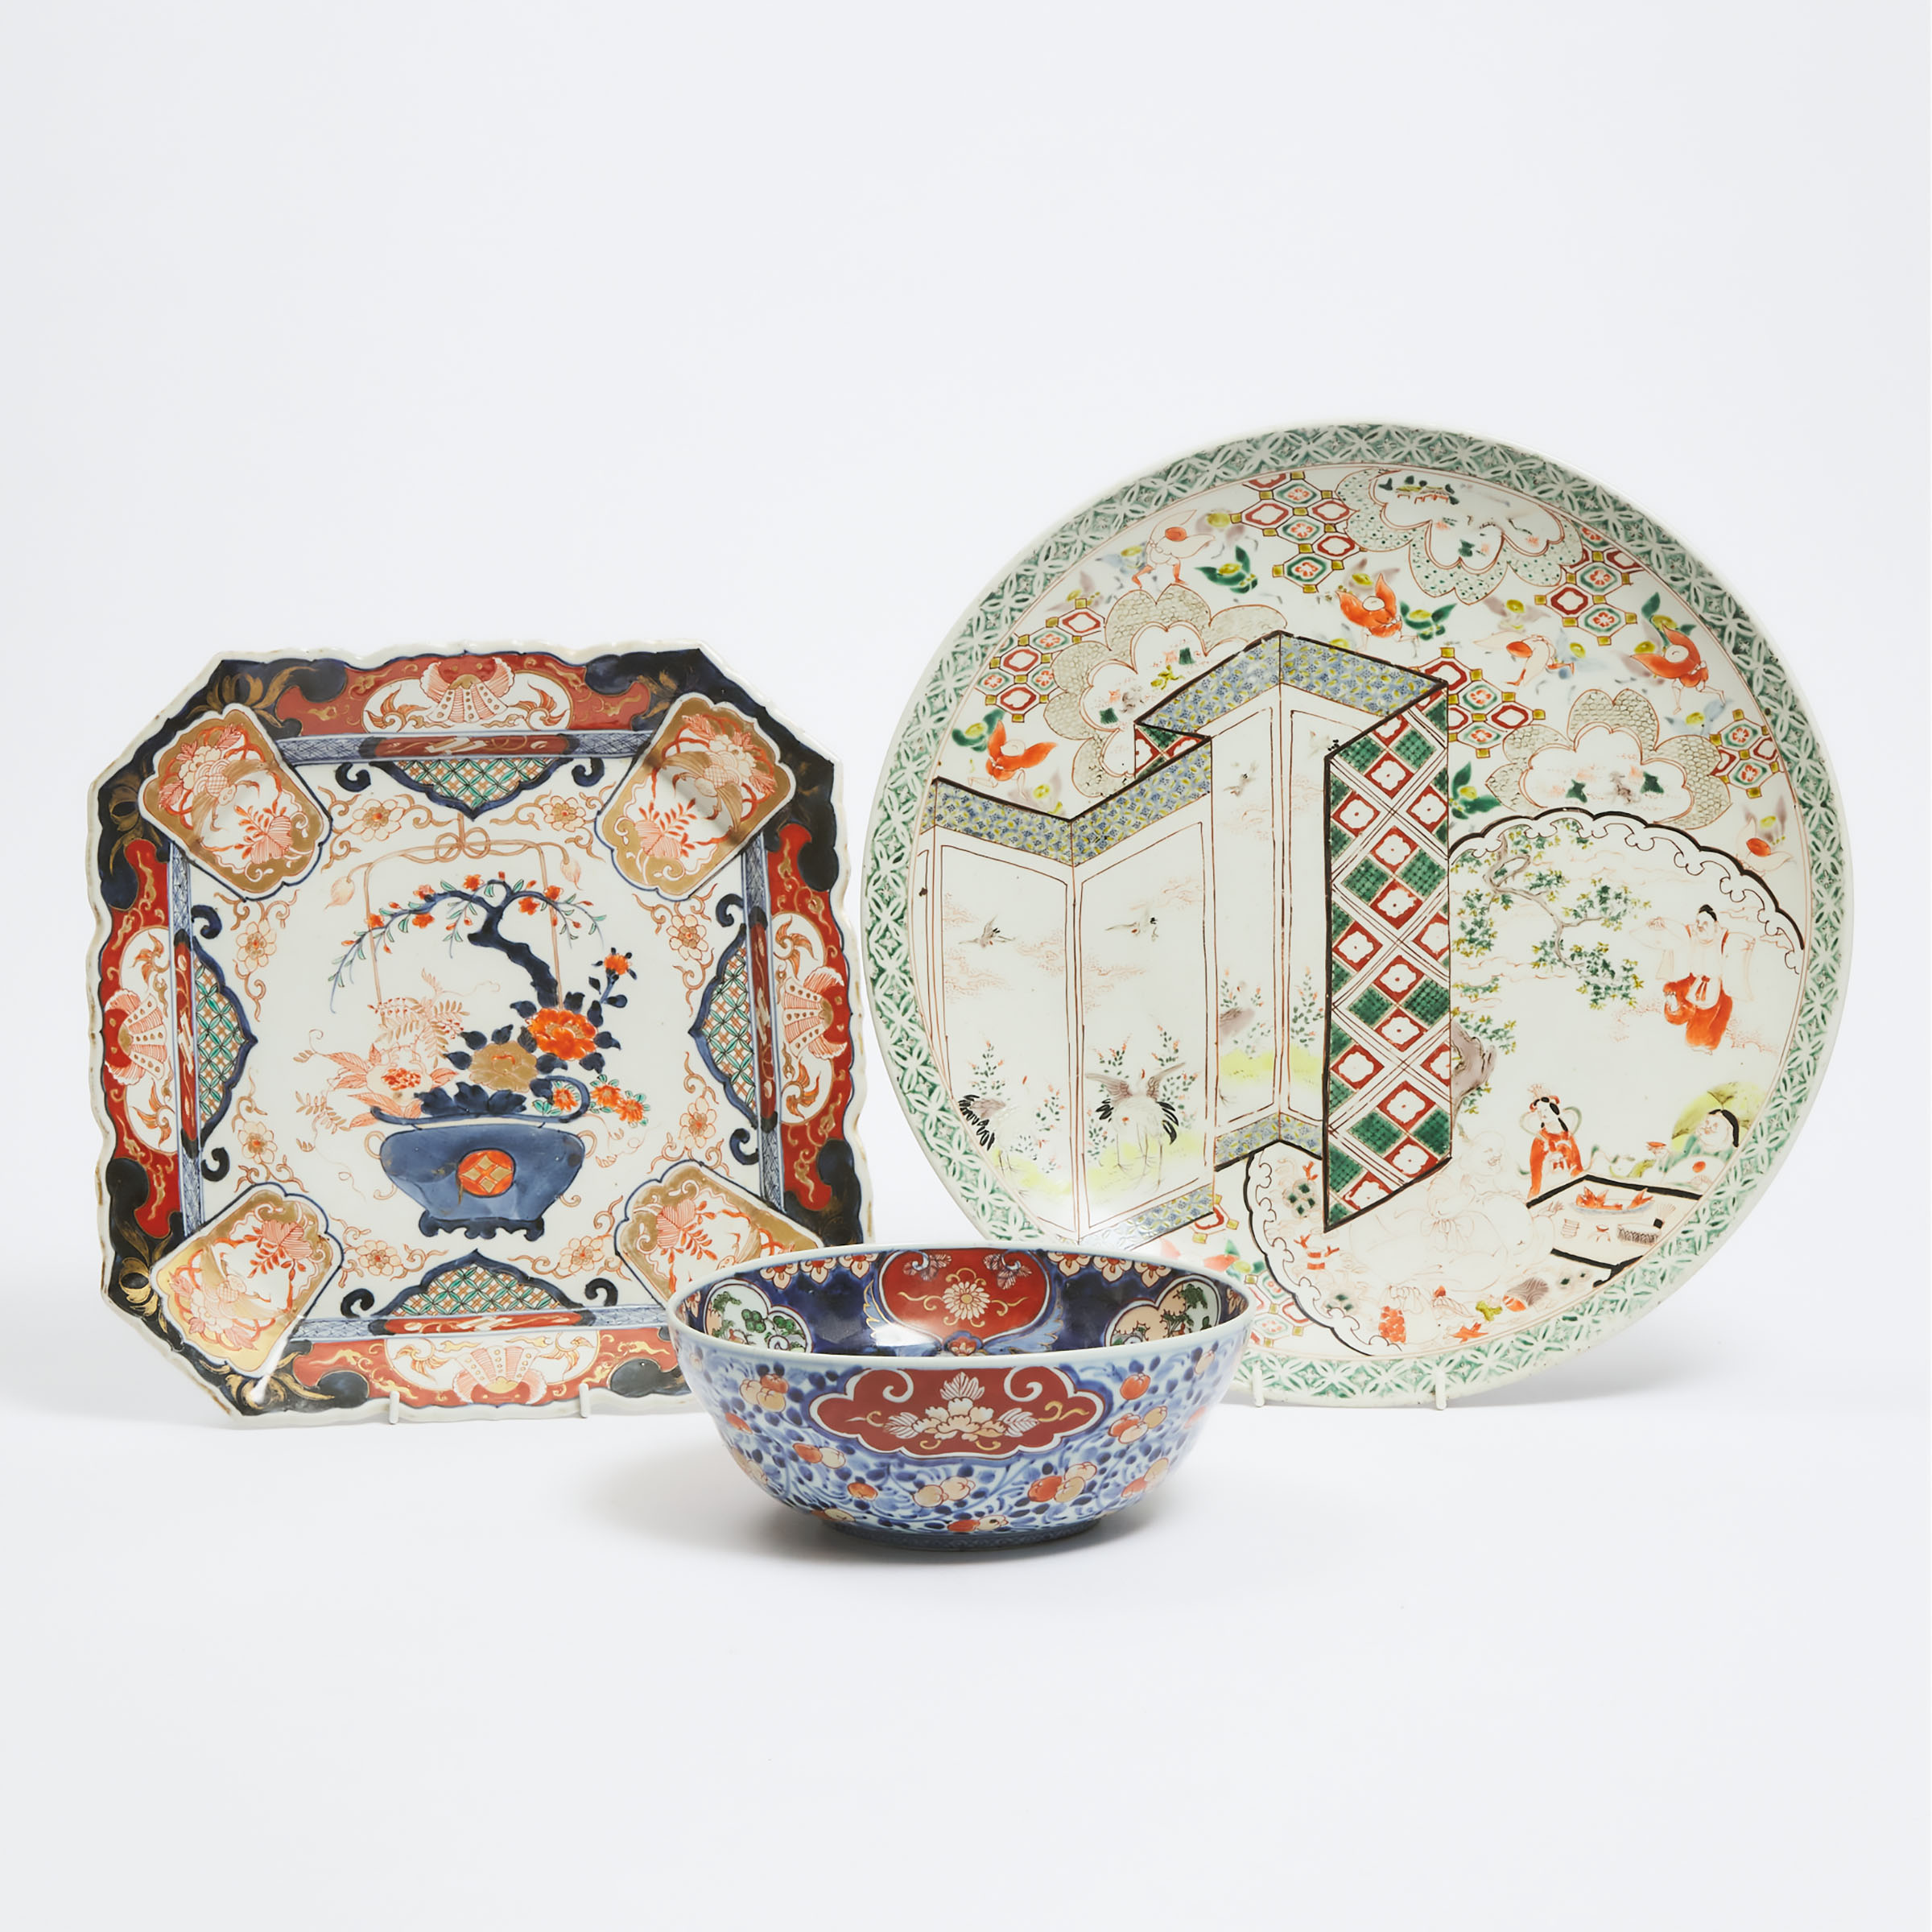 A Large Arita Charger, Together With Two Imari Wares, 18th/19th Century